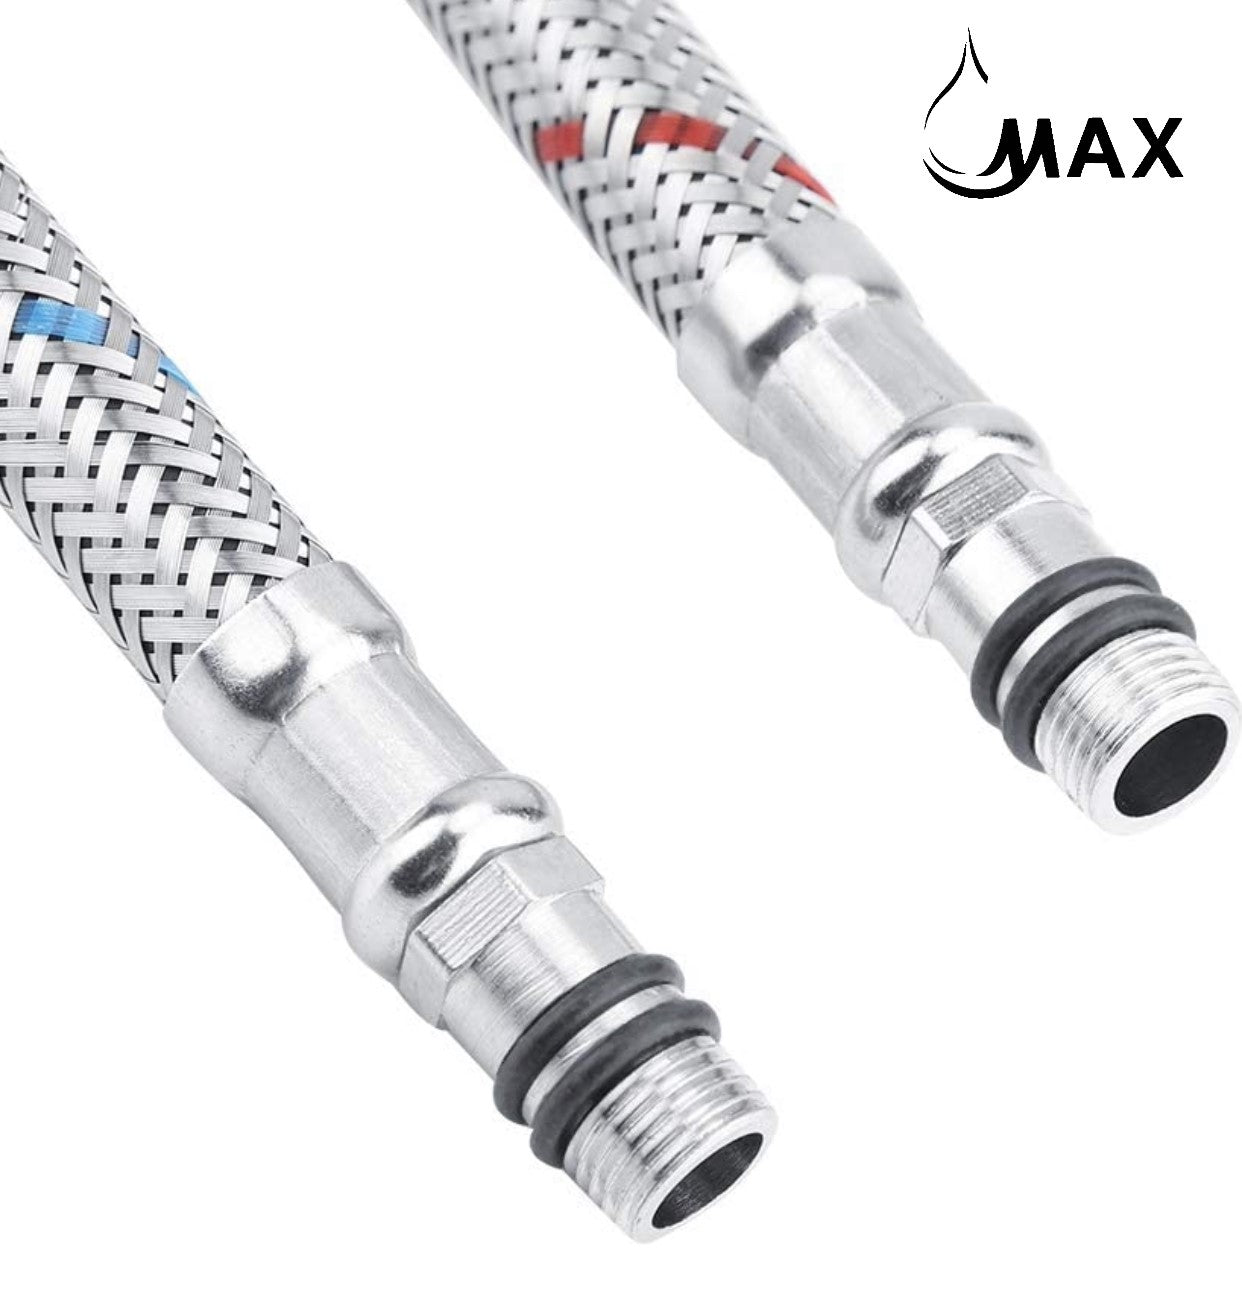 Braided Stainless Steel Water Supply Hoses Faucet Connector 31" Length 8MM Male, 9/16 Inches Female